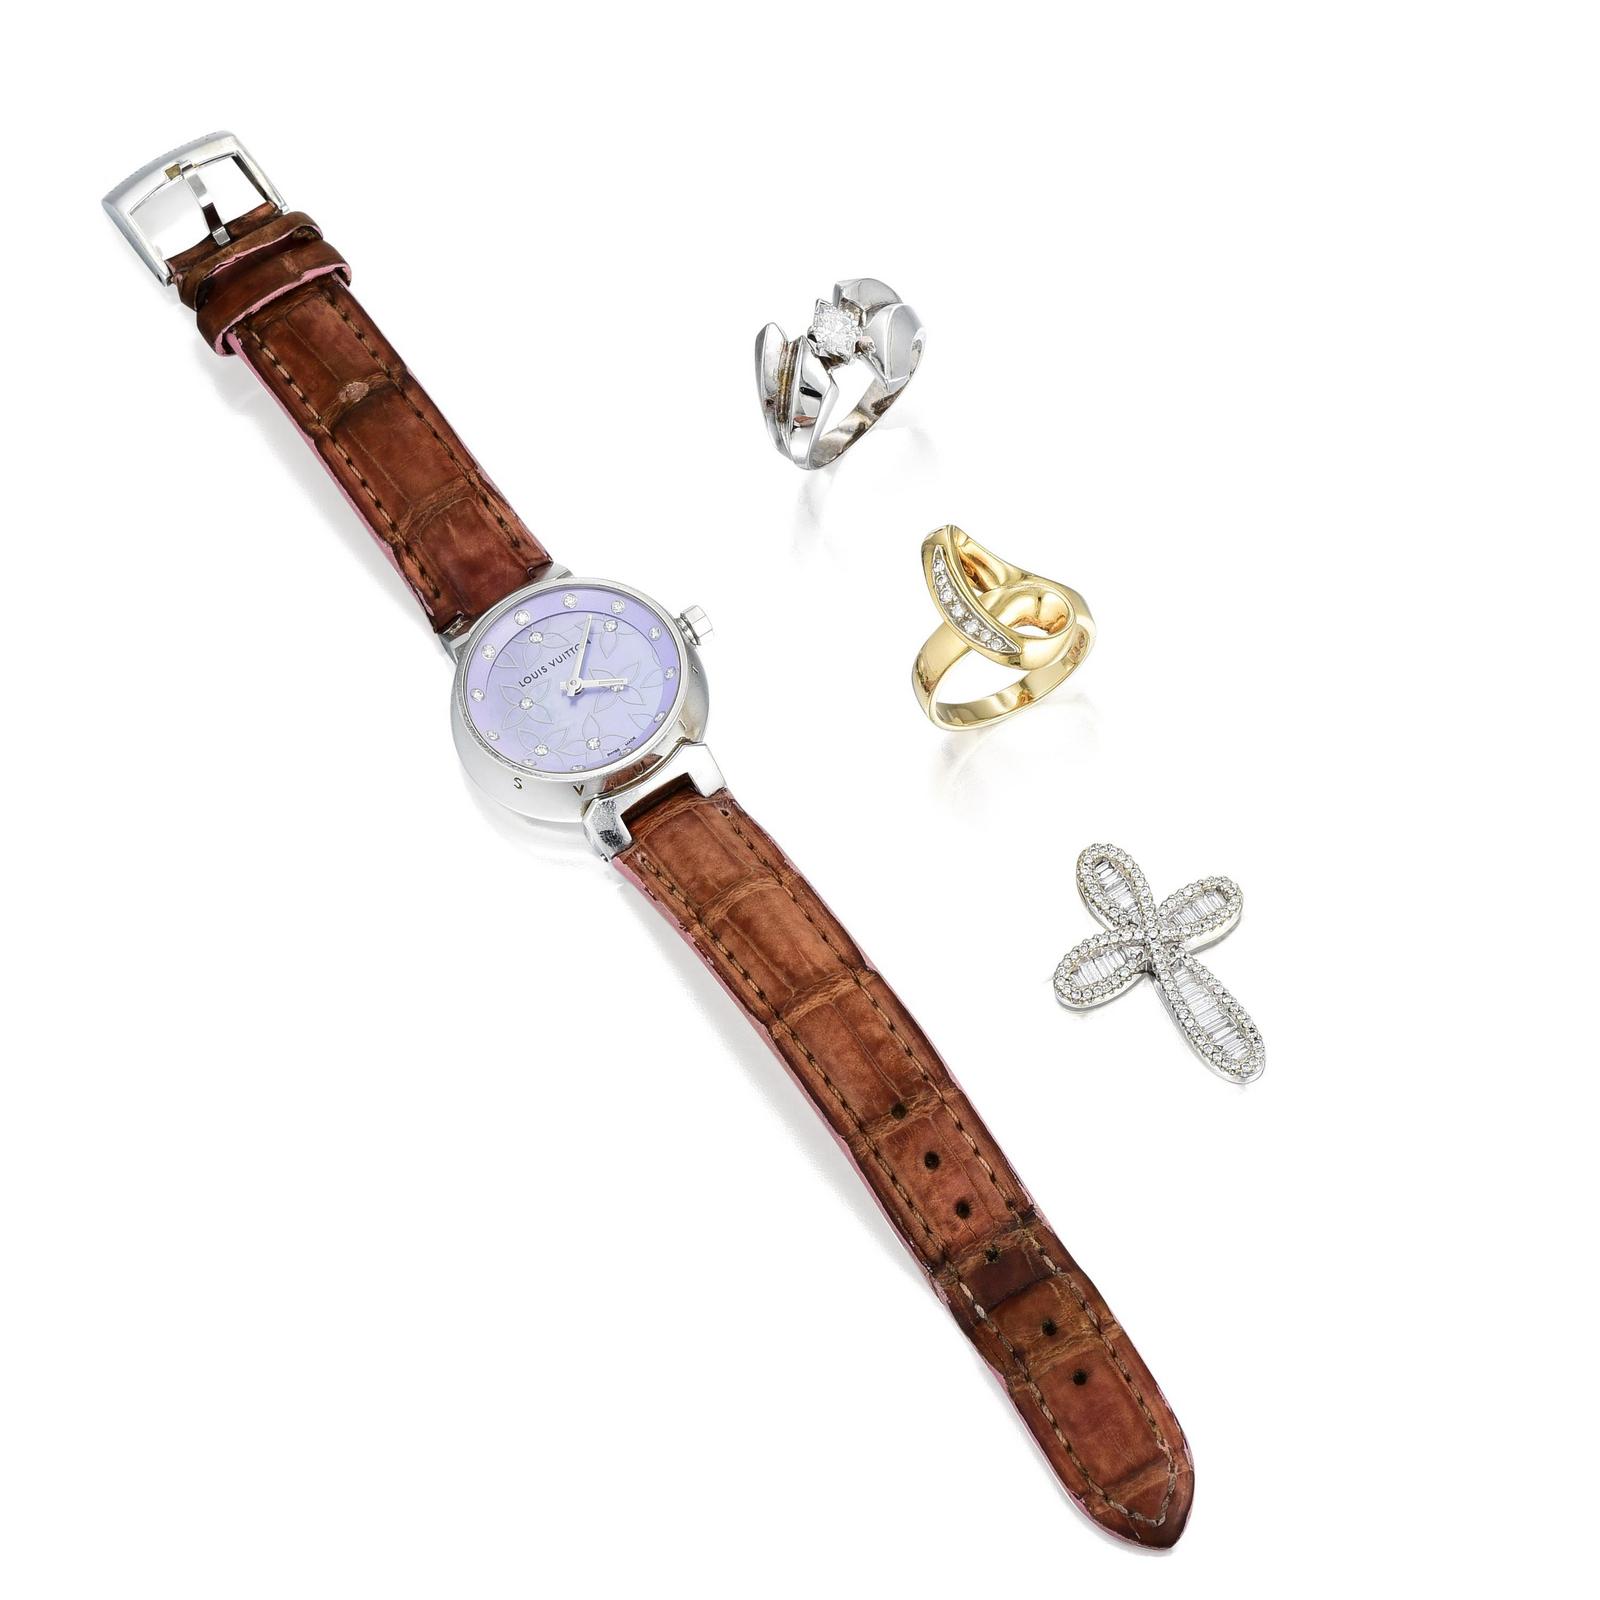 Lv Louis vuitton fashion womens stainless watch